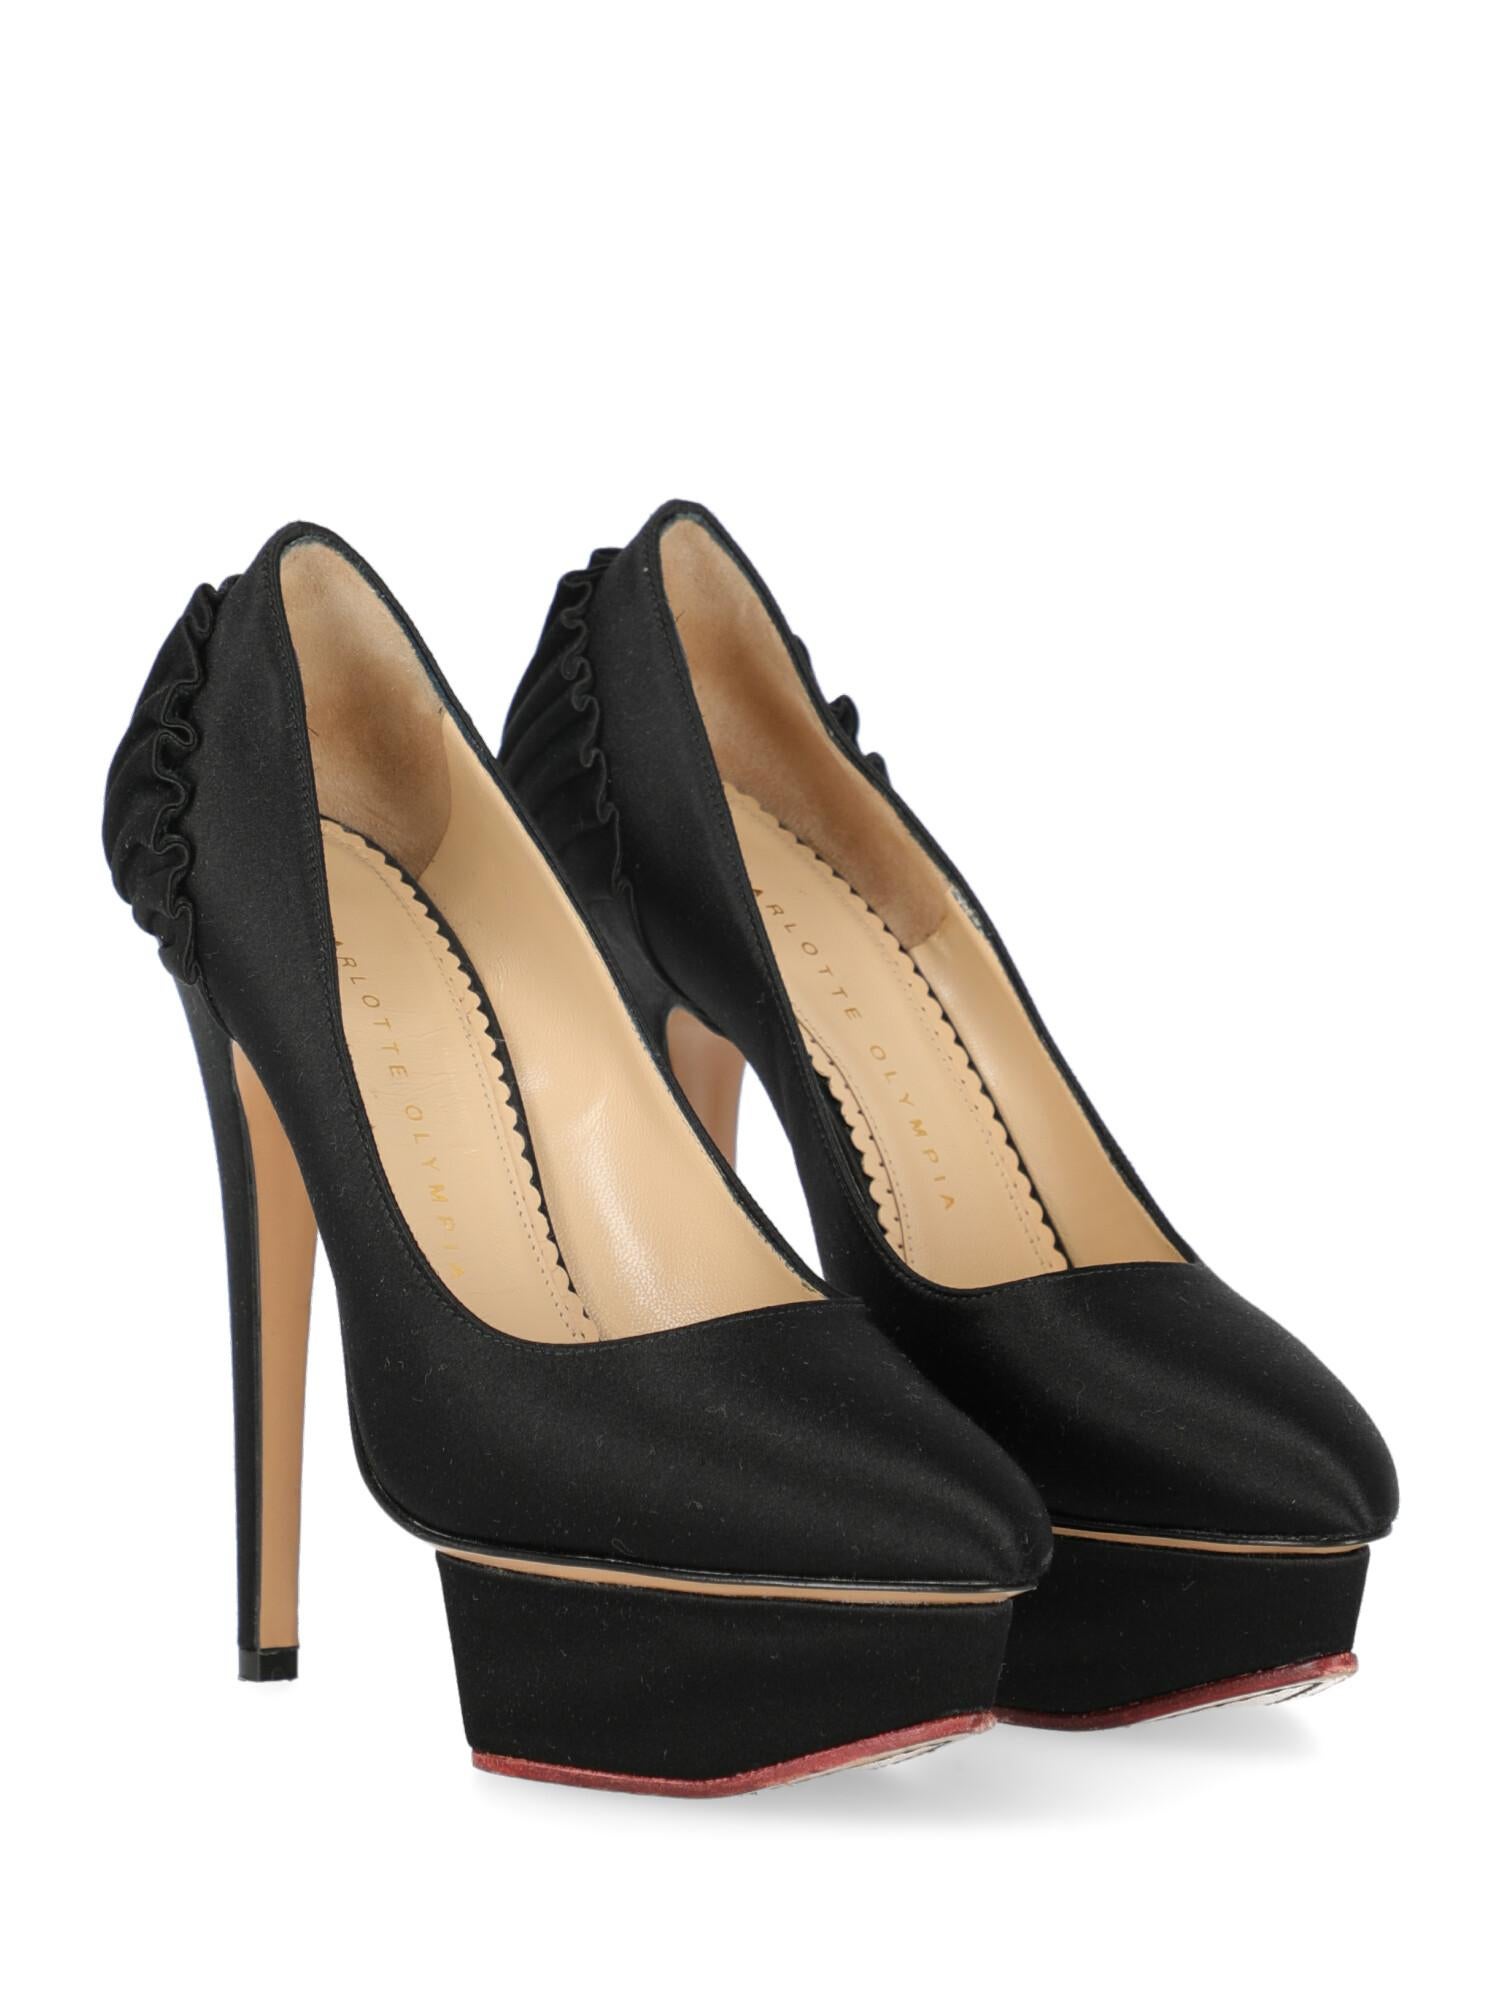 Shoe, fabric, solid color, internal logo, round toe, leather insole, tapered heel, high heel

Includes:
- Dust bag

Product Condition: Very Good
Sole: visible sign of use. Upper: slightly visible wrinkle. Insole: visible wrinkling, negligible